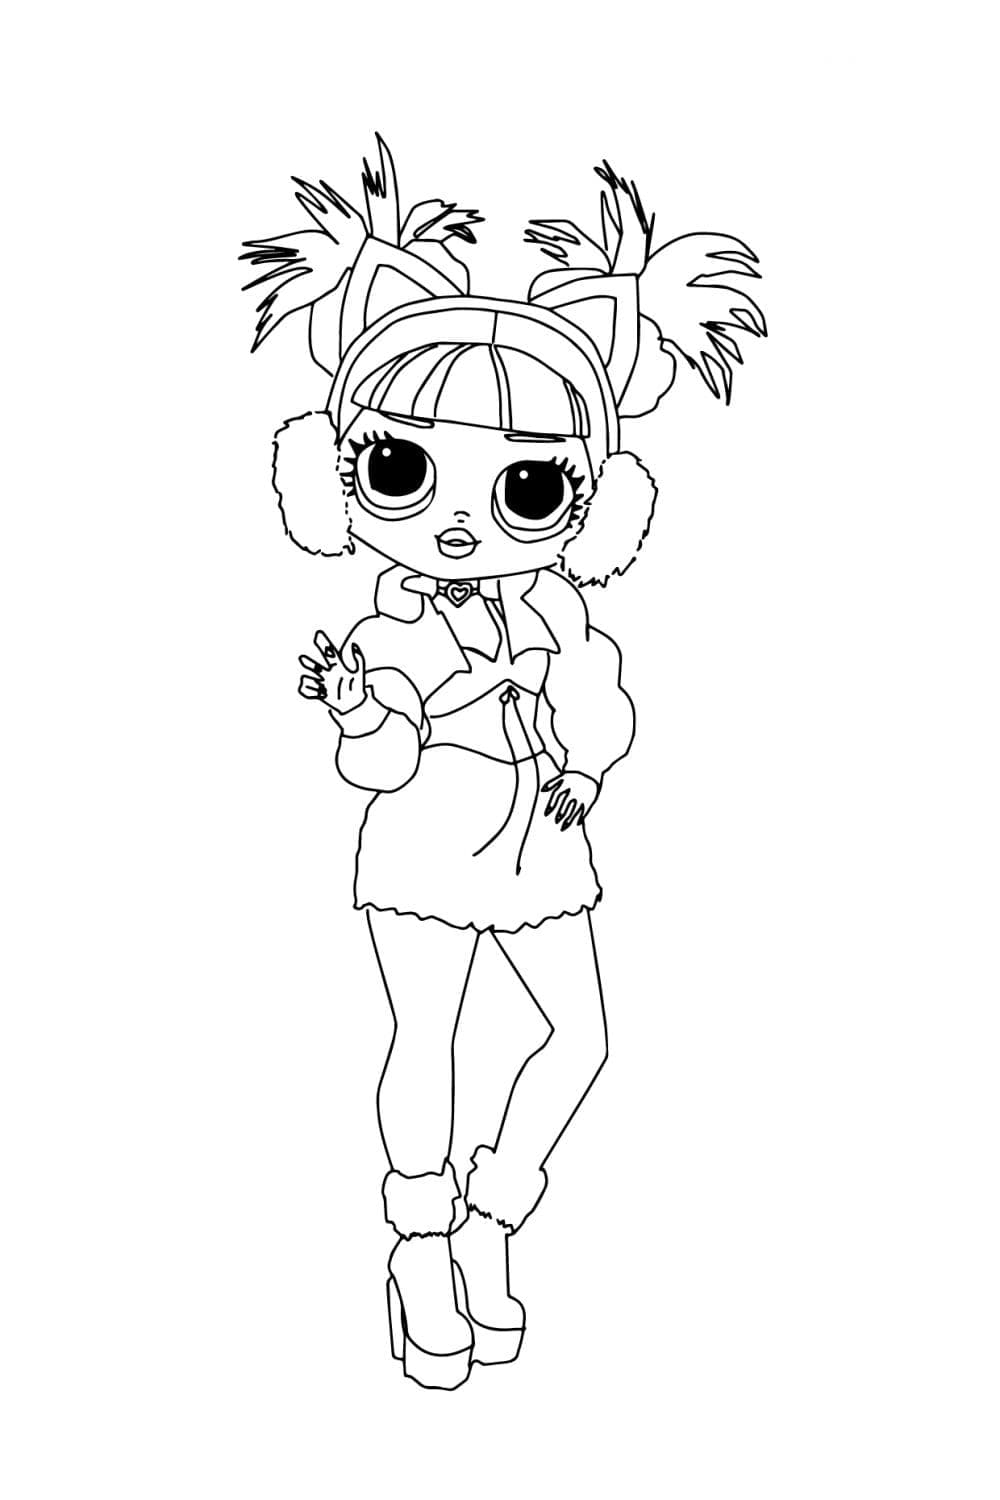 Missy Meow LOL OMG coloring page